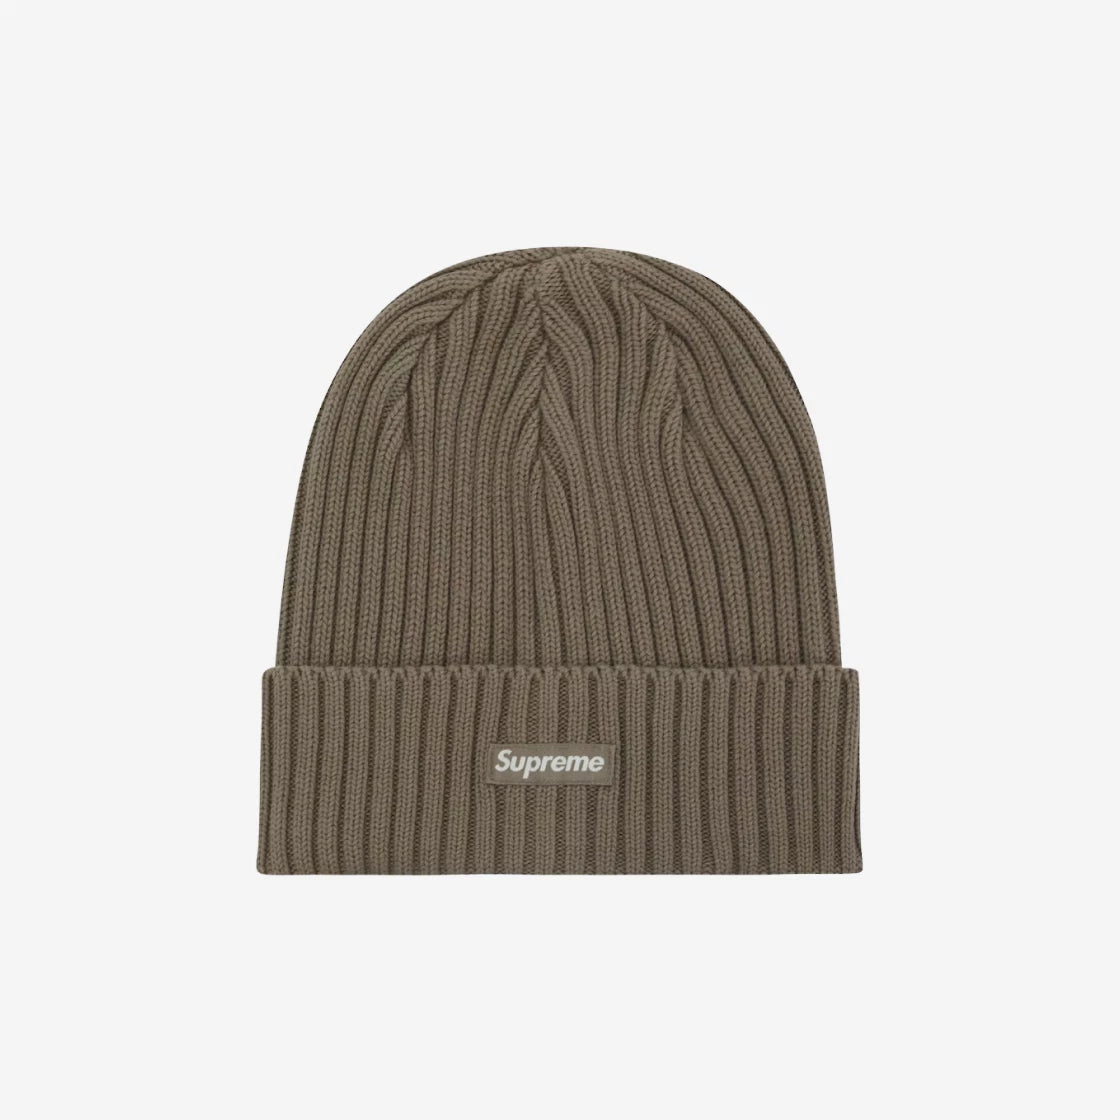 AprilroofsSupreme Overdyed Beanie NT BTS ジョングク6